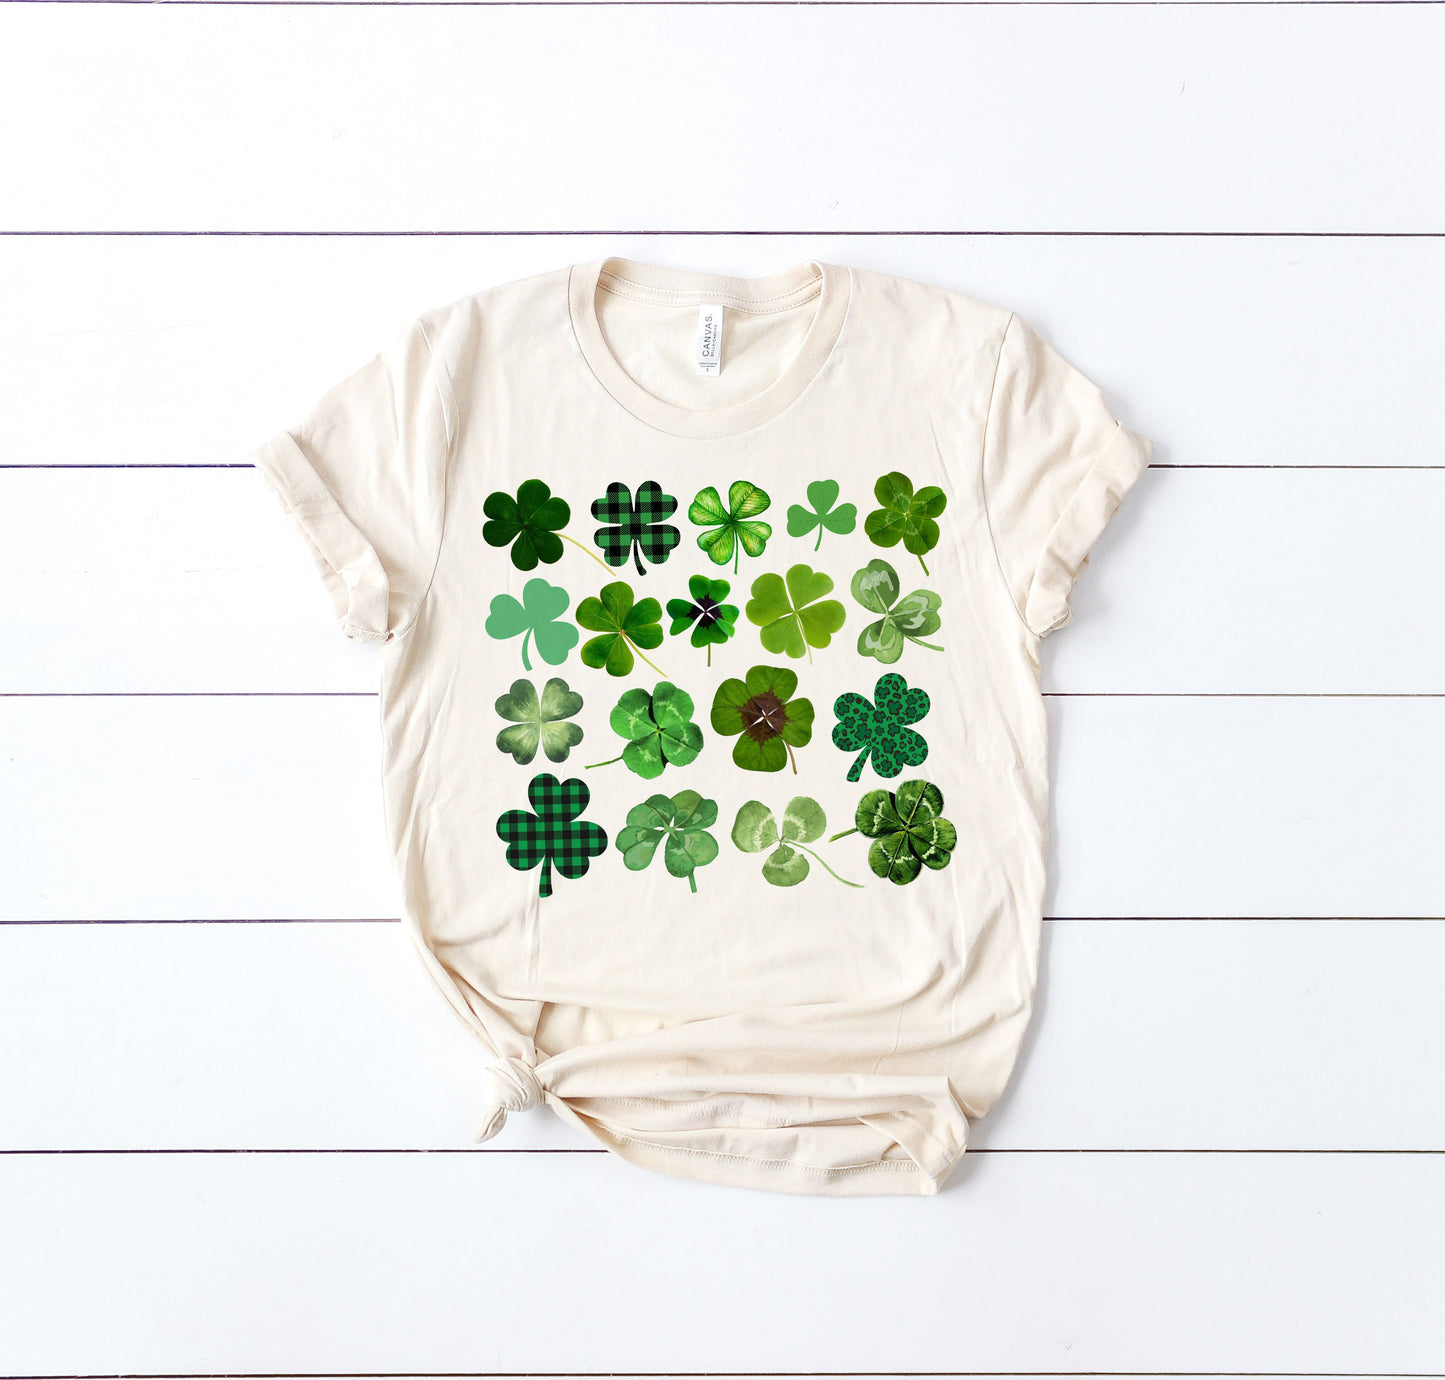 20 Different Kinds of Lucky Clovers St Patrick's Day Inspiring Ultra Soft Graphic Tee Unisex Soft Tee T-shirt for Women or Men